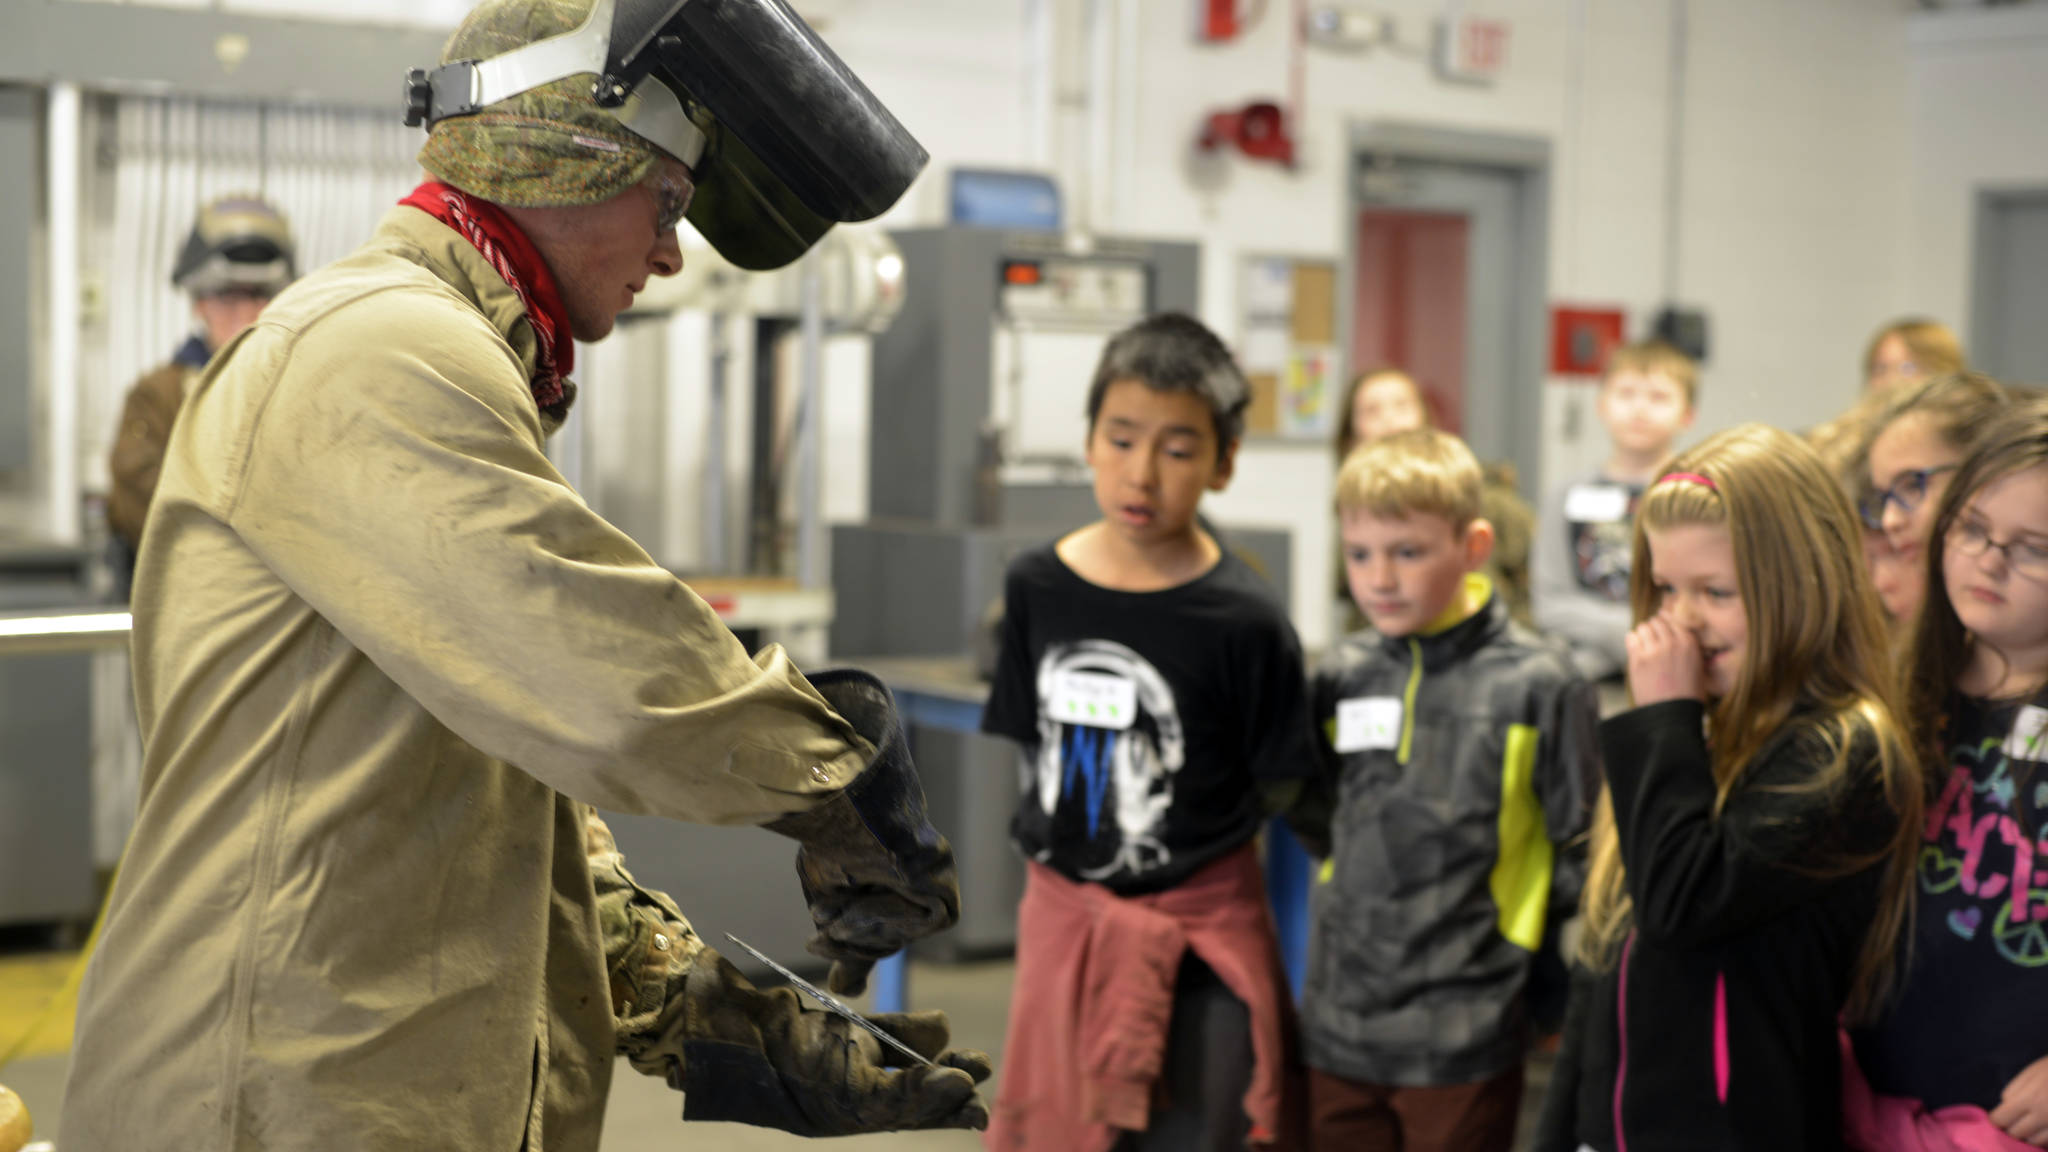 Connor McKamy, a graduate of the Kenai Peninsula College’s welding program, shows fourth-graders from Mountain View Elementary an example of the work he does. (Kat Sorensen/Peninsula Clarion)